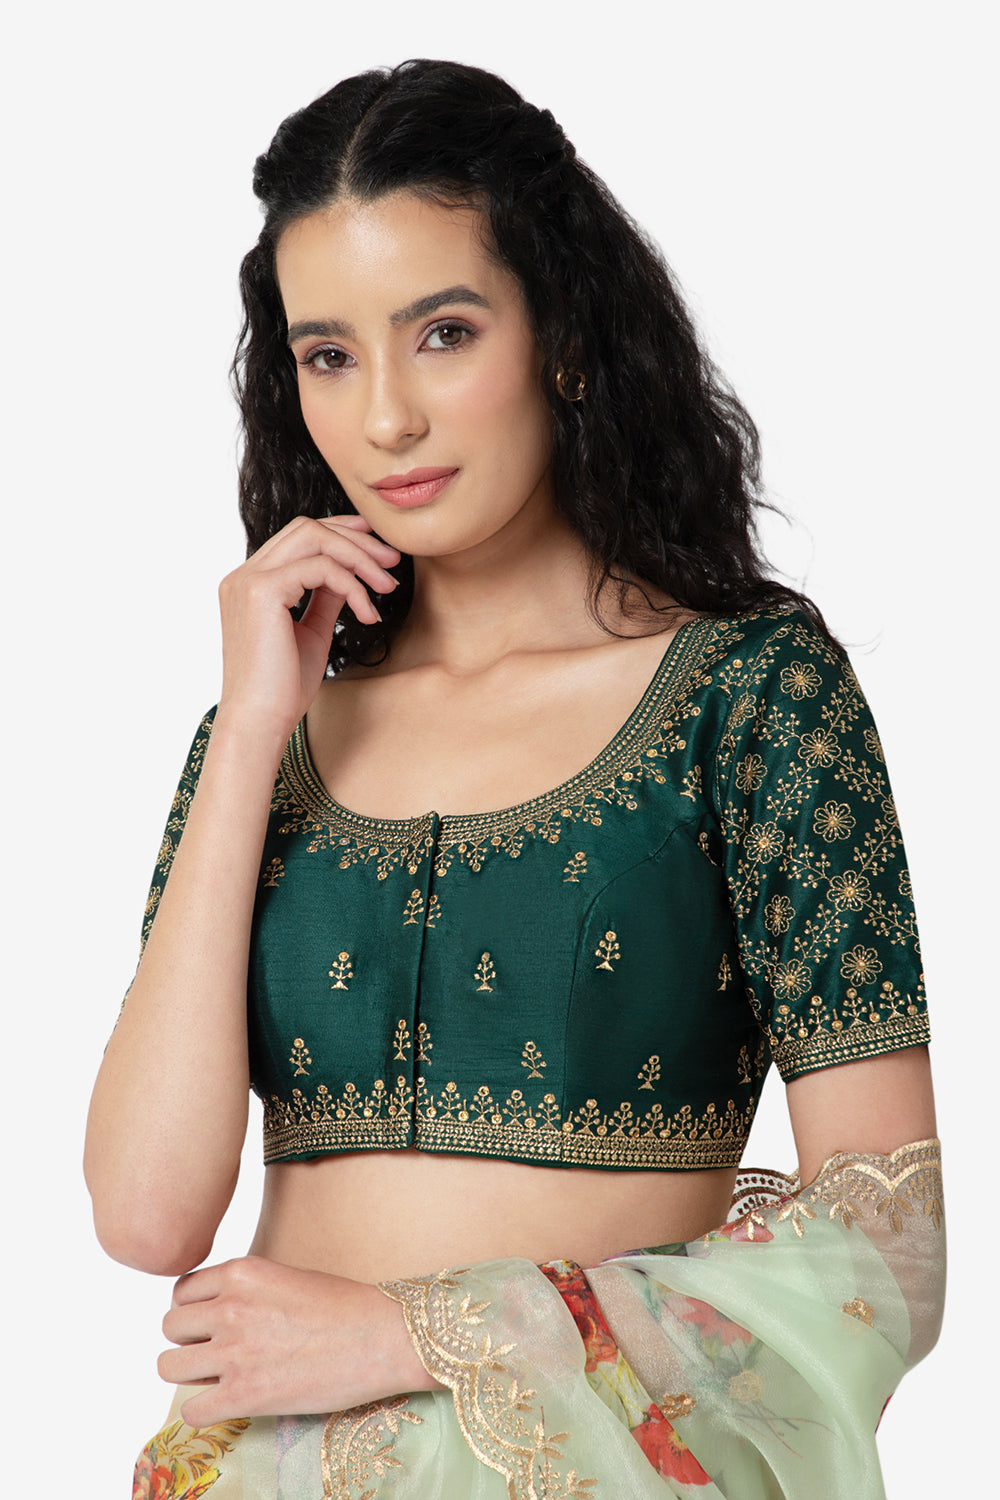 Naidu Hall Ethnic Saree Blouse with Round Neck Elbow Sleeves - Bottle Green